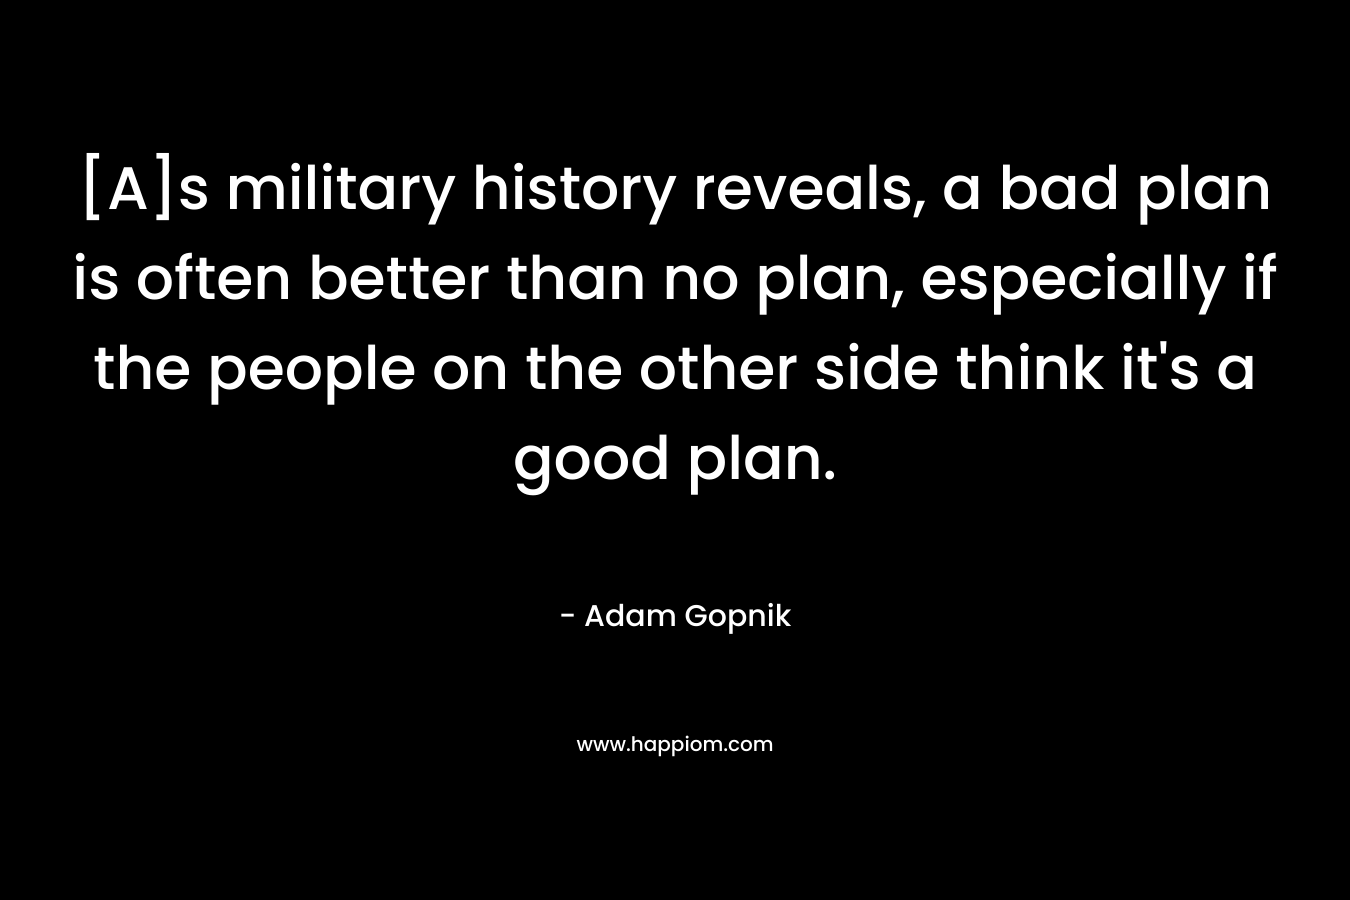 [A]s military history reveals, a bad plan is often better than no plan, especially if the people on the other side think it's a good plan.